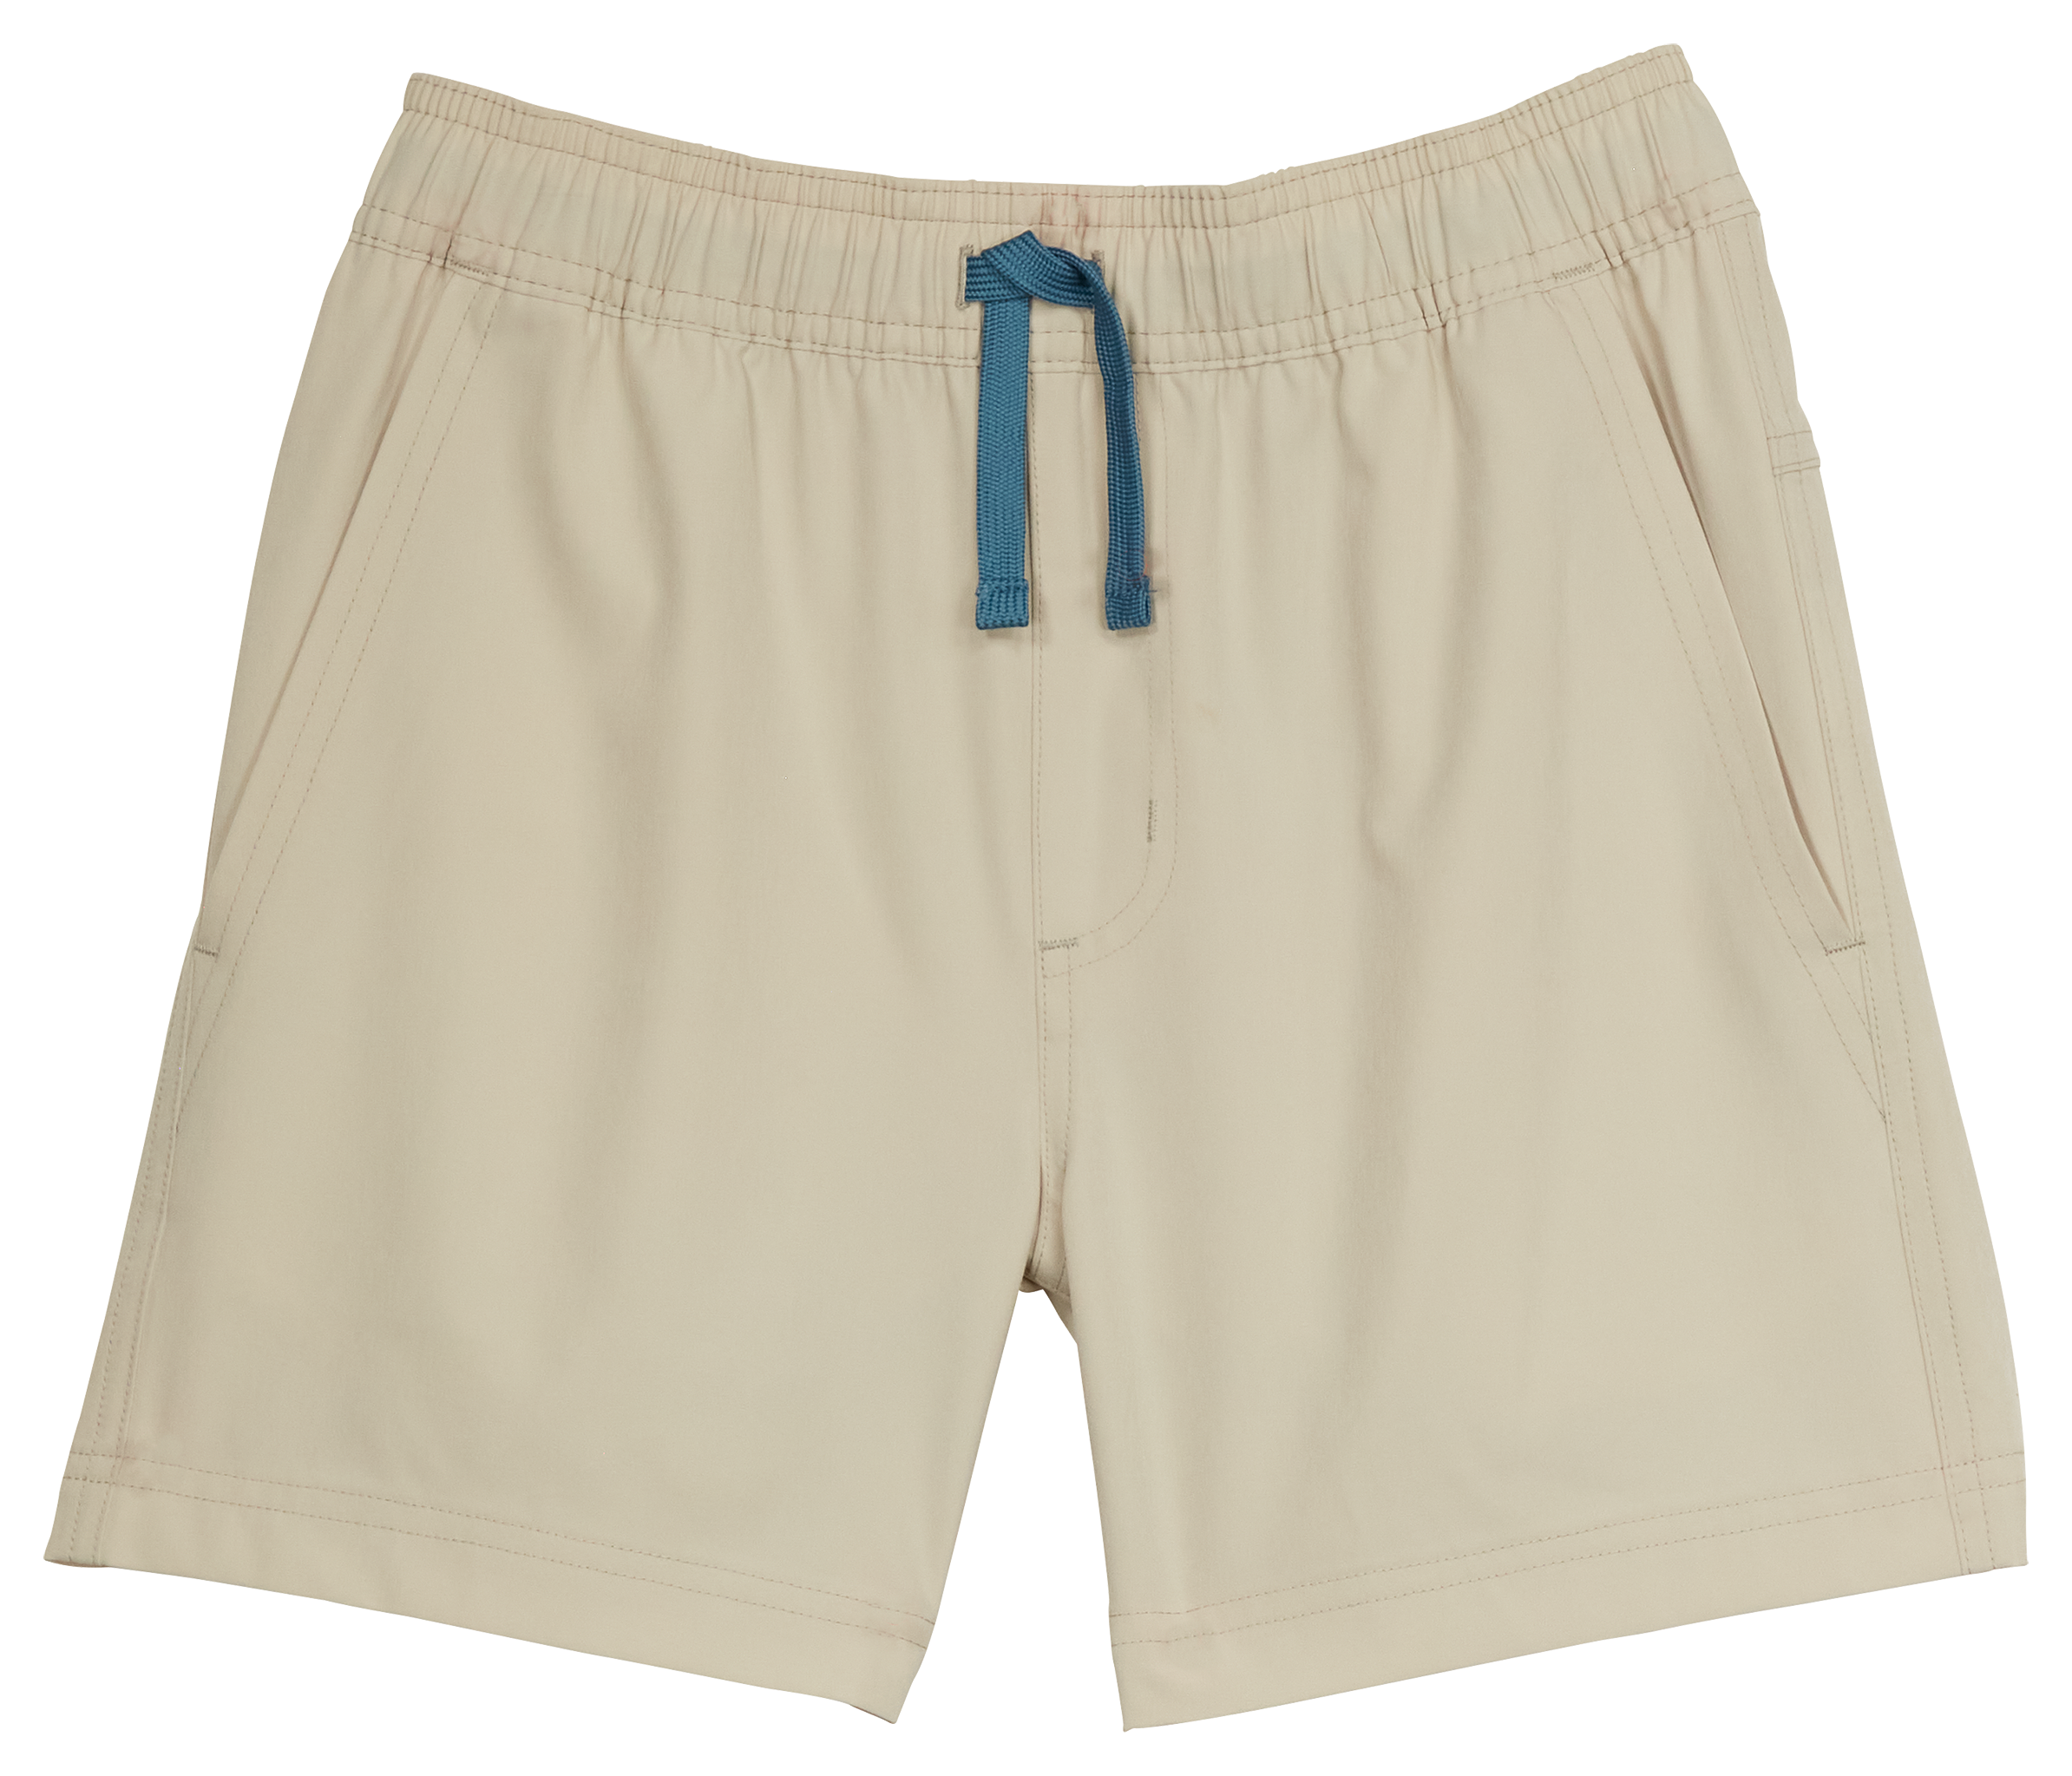 World Wide Sportsman Charter 3-Pocket Pull-On Shorts for Kids - Peyote - XS